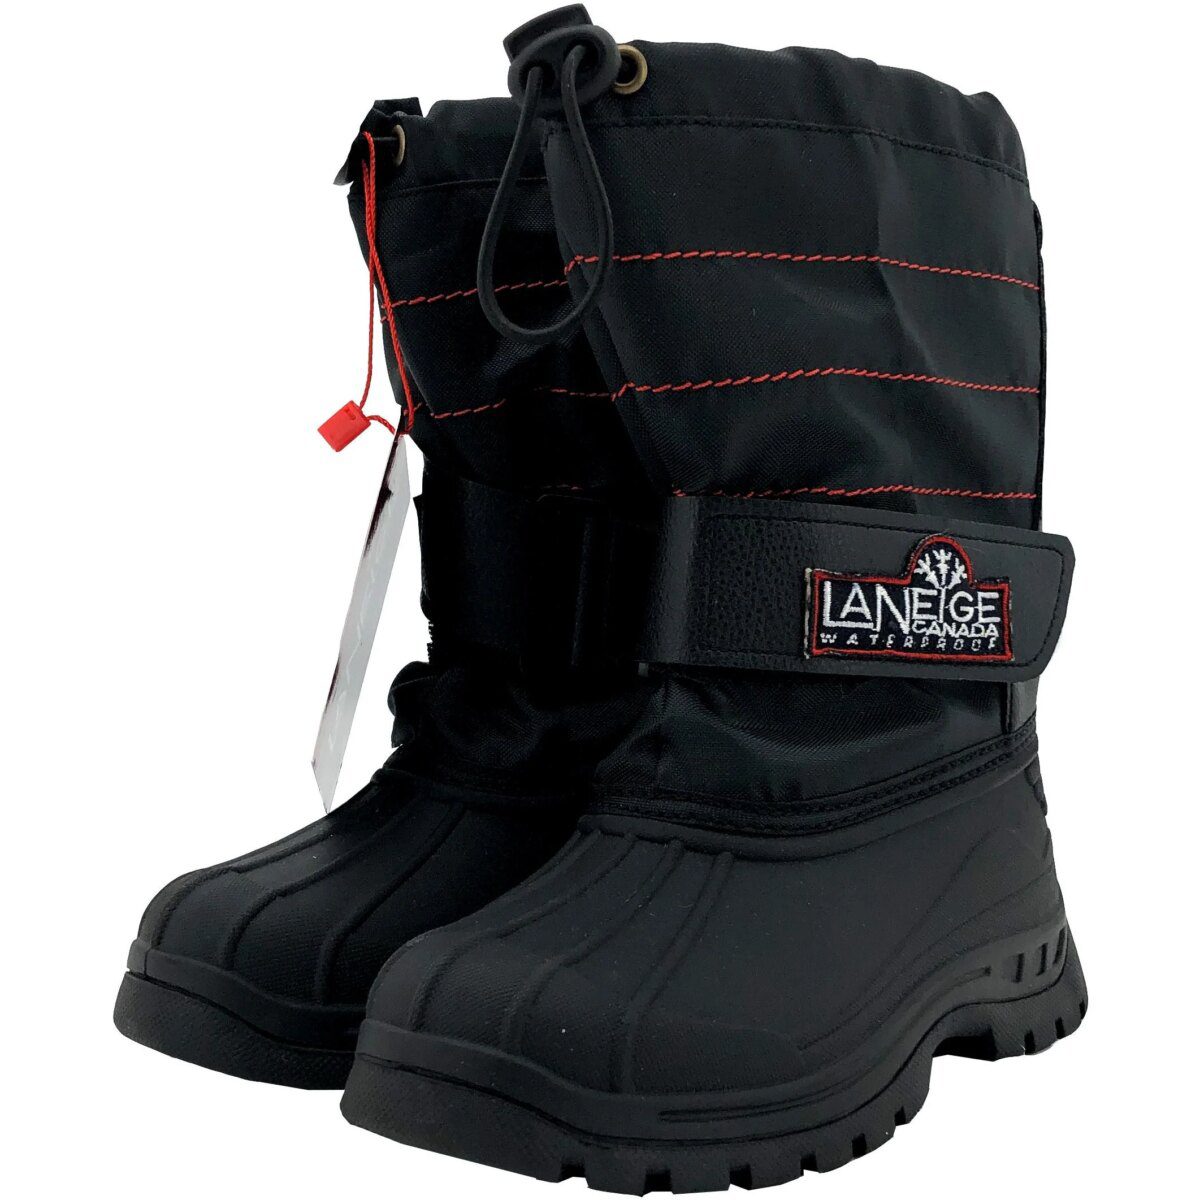 La Neige Kids Winter Boots / Boys / Waterproof / Removable Liners / Various Sizes **NO BOX**